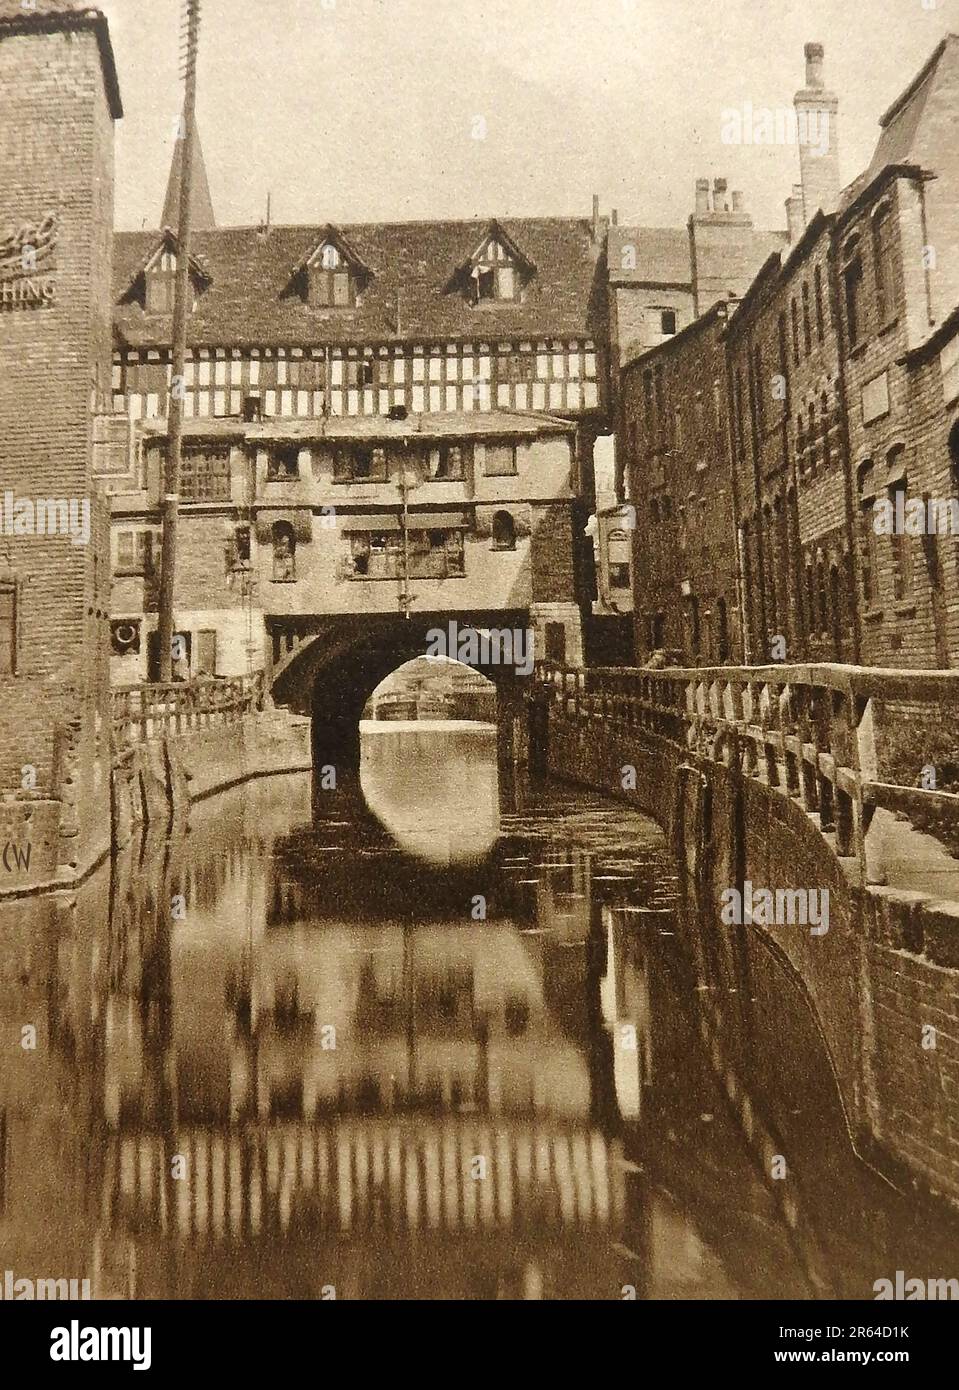 High Bridge at Lincoln England in 1933. High Bridge built around 1160.carries the High Street over the River Witham in Lincoln. It is the oldest bridge in the United Kingdom which still has buildings, once common architectural feature of ancient stone build bridges.. The present buildings upon it were rebuilt around 1901. The old bridge chapel bridge  built in 1235, was unused in 1549 due to the English Reformation and was demolished in 1762 . The opening beneath the bridge has been nicknamed the Glory Hole Stock Photo